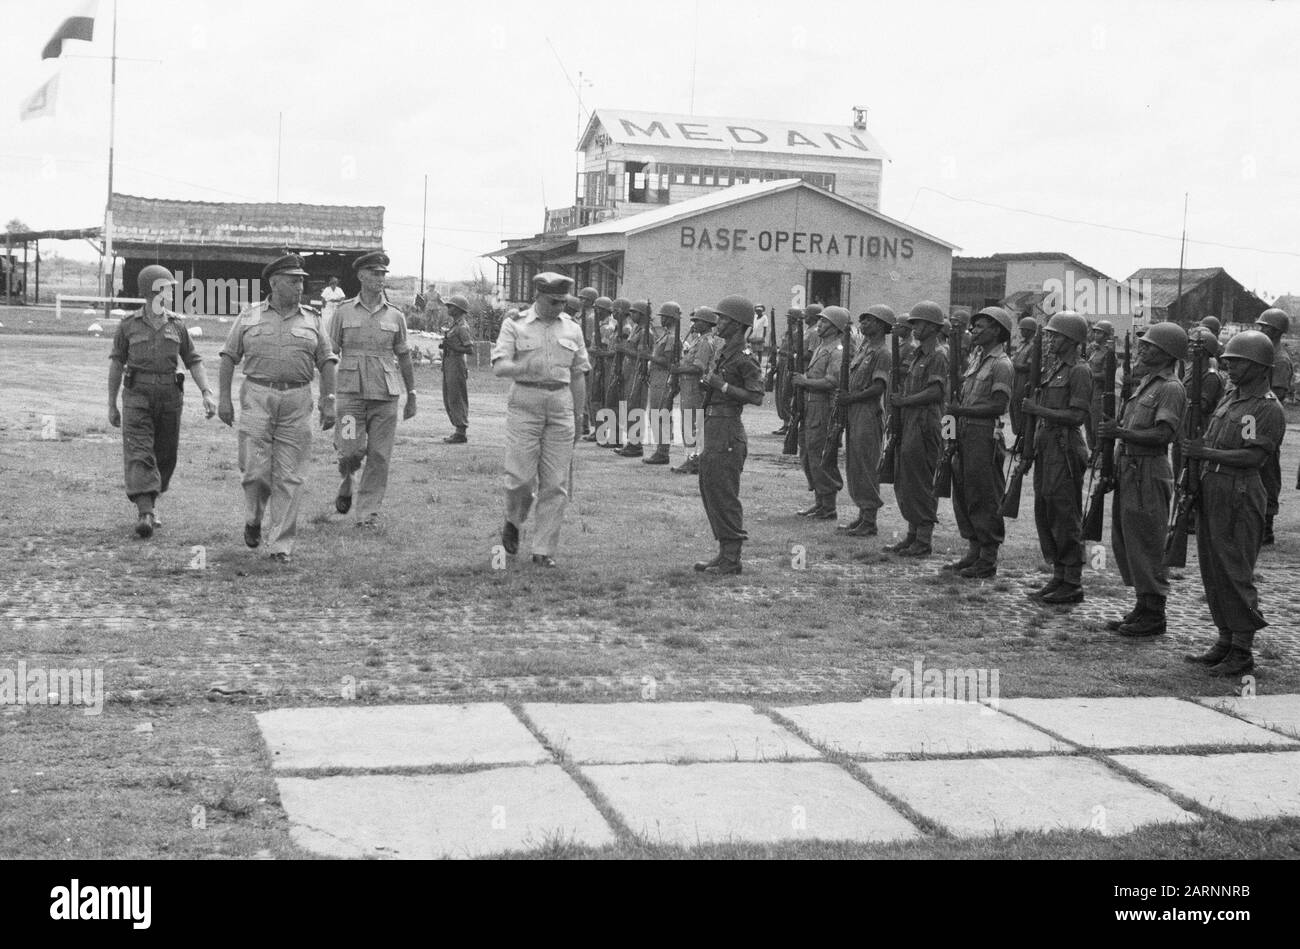 Departure of General S.H. Trail from Medan to Batavia  Inspection of the Guard of Honor at Medan airport by the army commander accompanied by the territorial troop commander of North Sumatra Maj. Gen. P. Scholten (left) Date: 5 May 1949 Location: Indonesia, Medan, Dutch East Indies Stock Photo